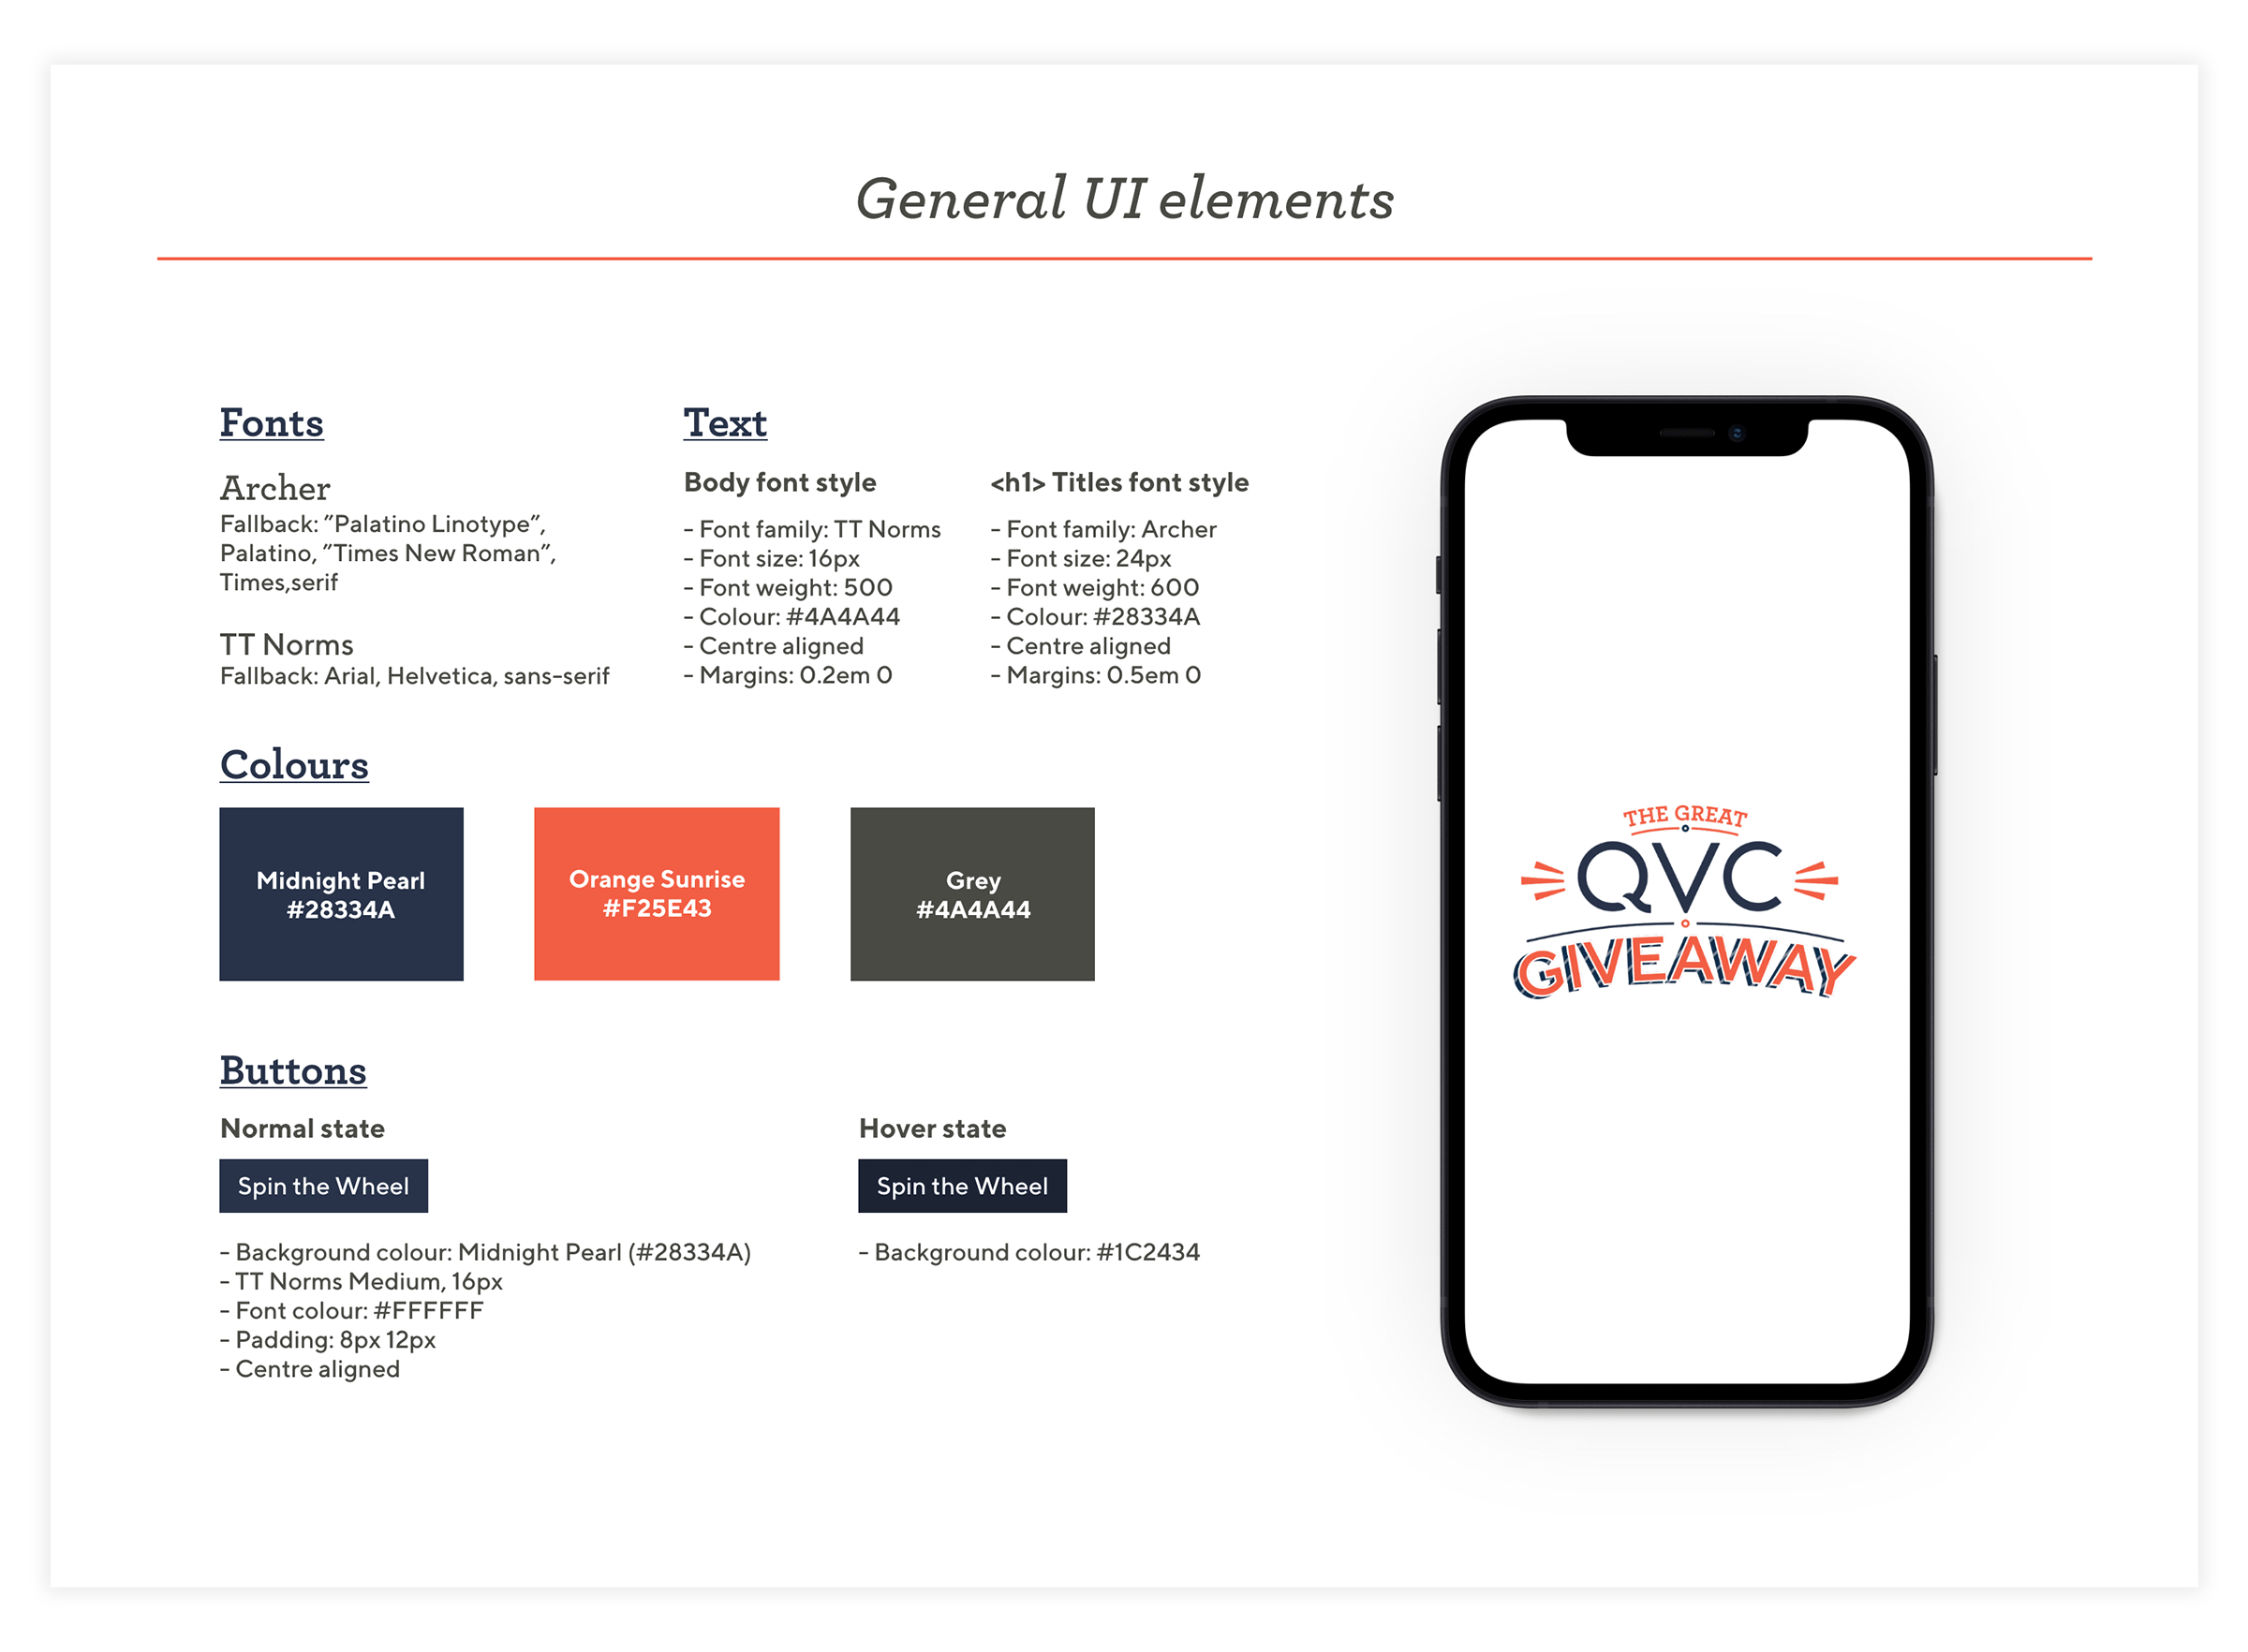 The Great QVC Giveaway UX documentation